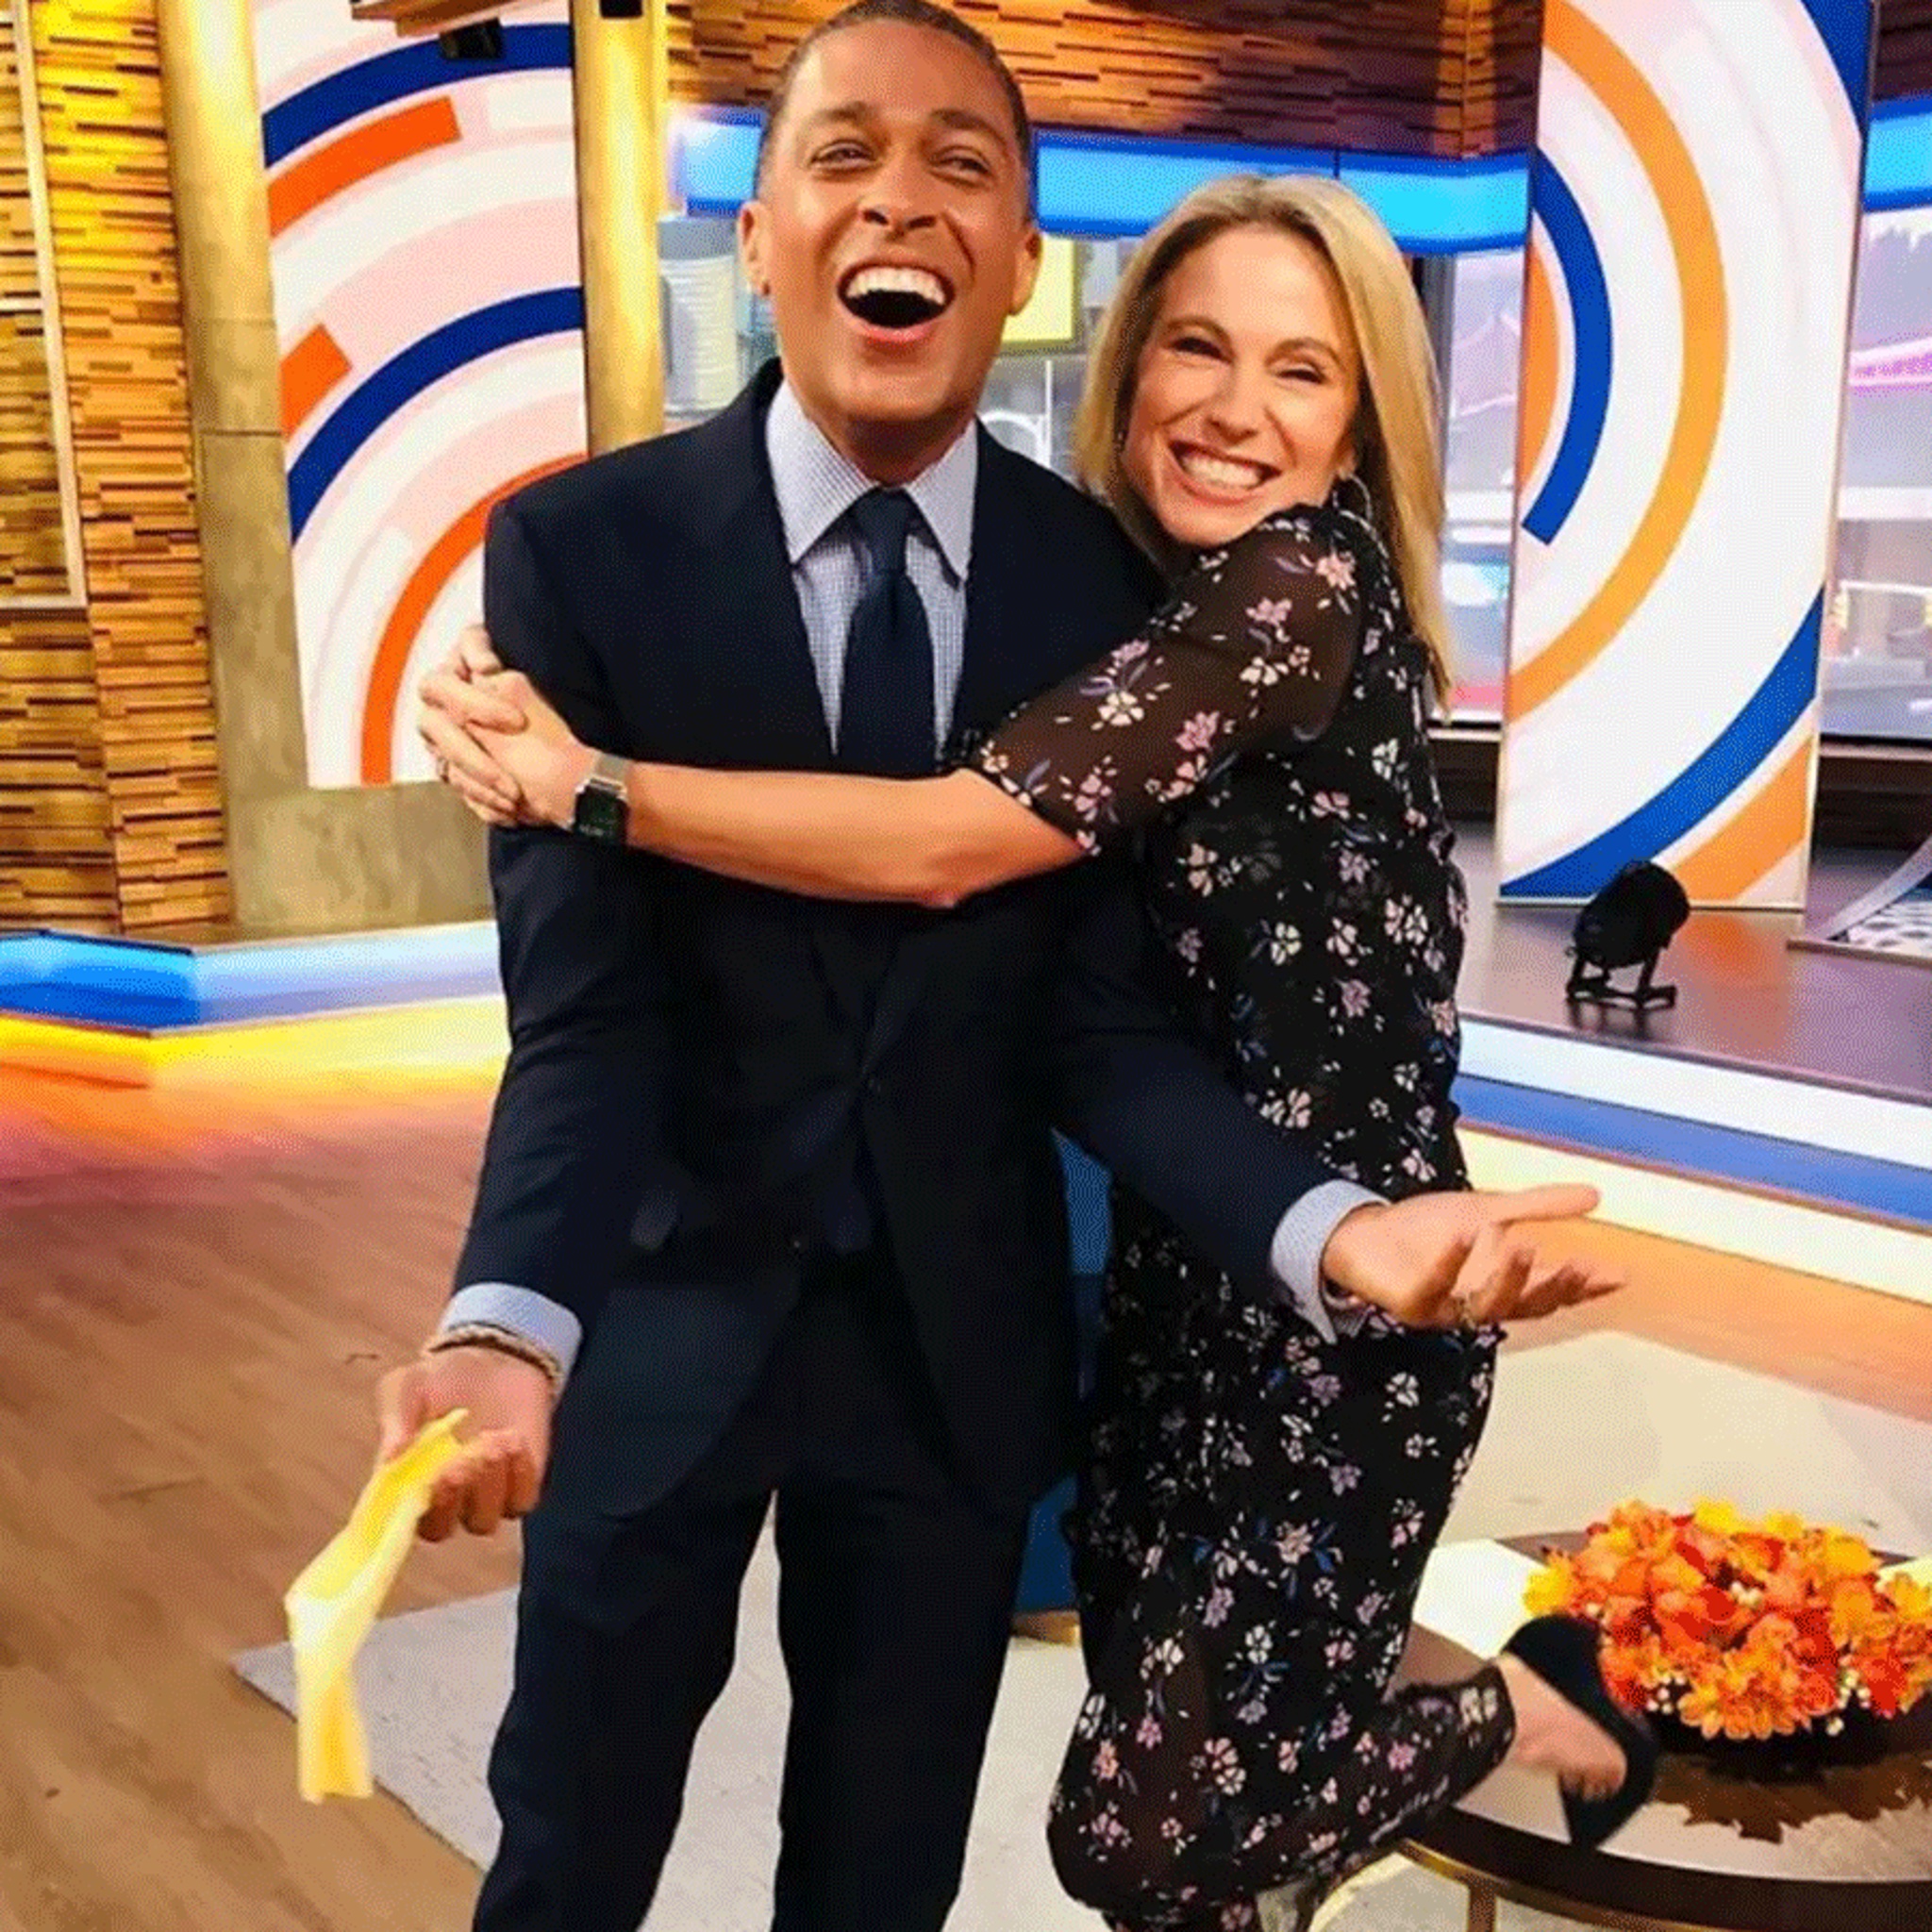 Amy Robach Says She, T.J. Holmes Are 'Missing Out' on Having Kids Together